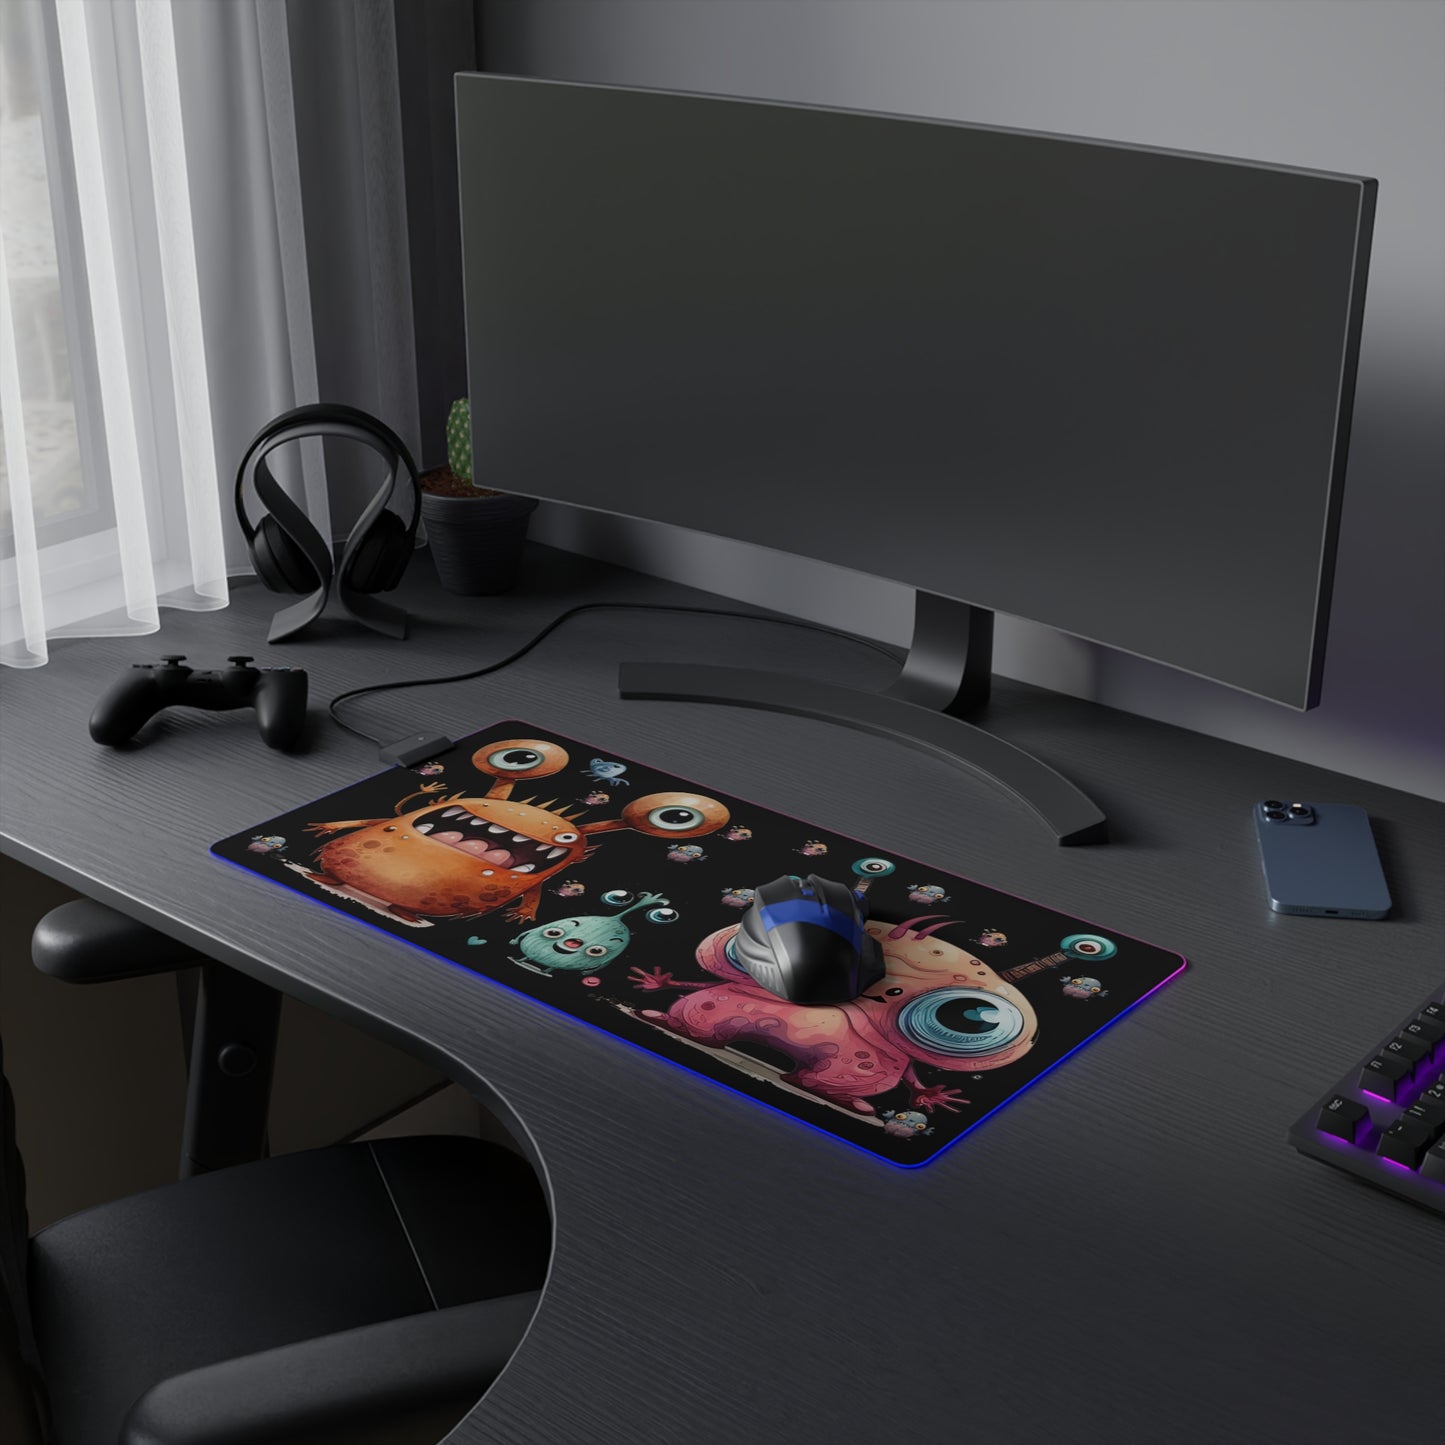 Gamer's Mouse Pad LED Backlit Mouse Pad Gift Idea Mouse Pad